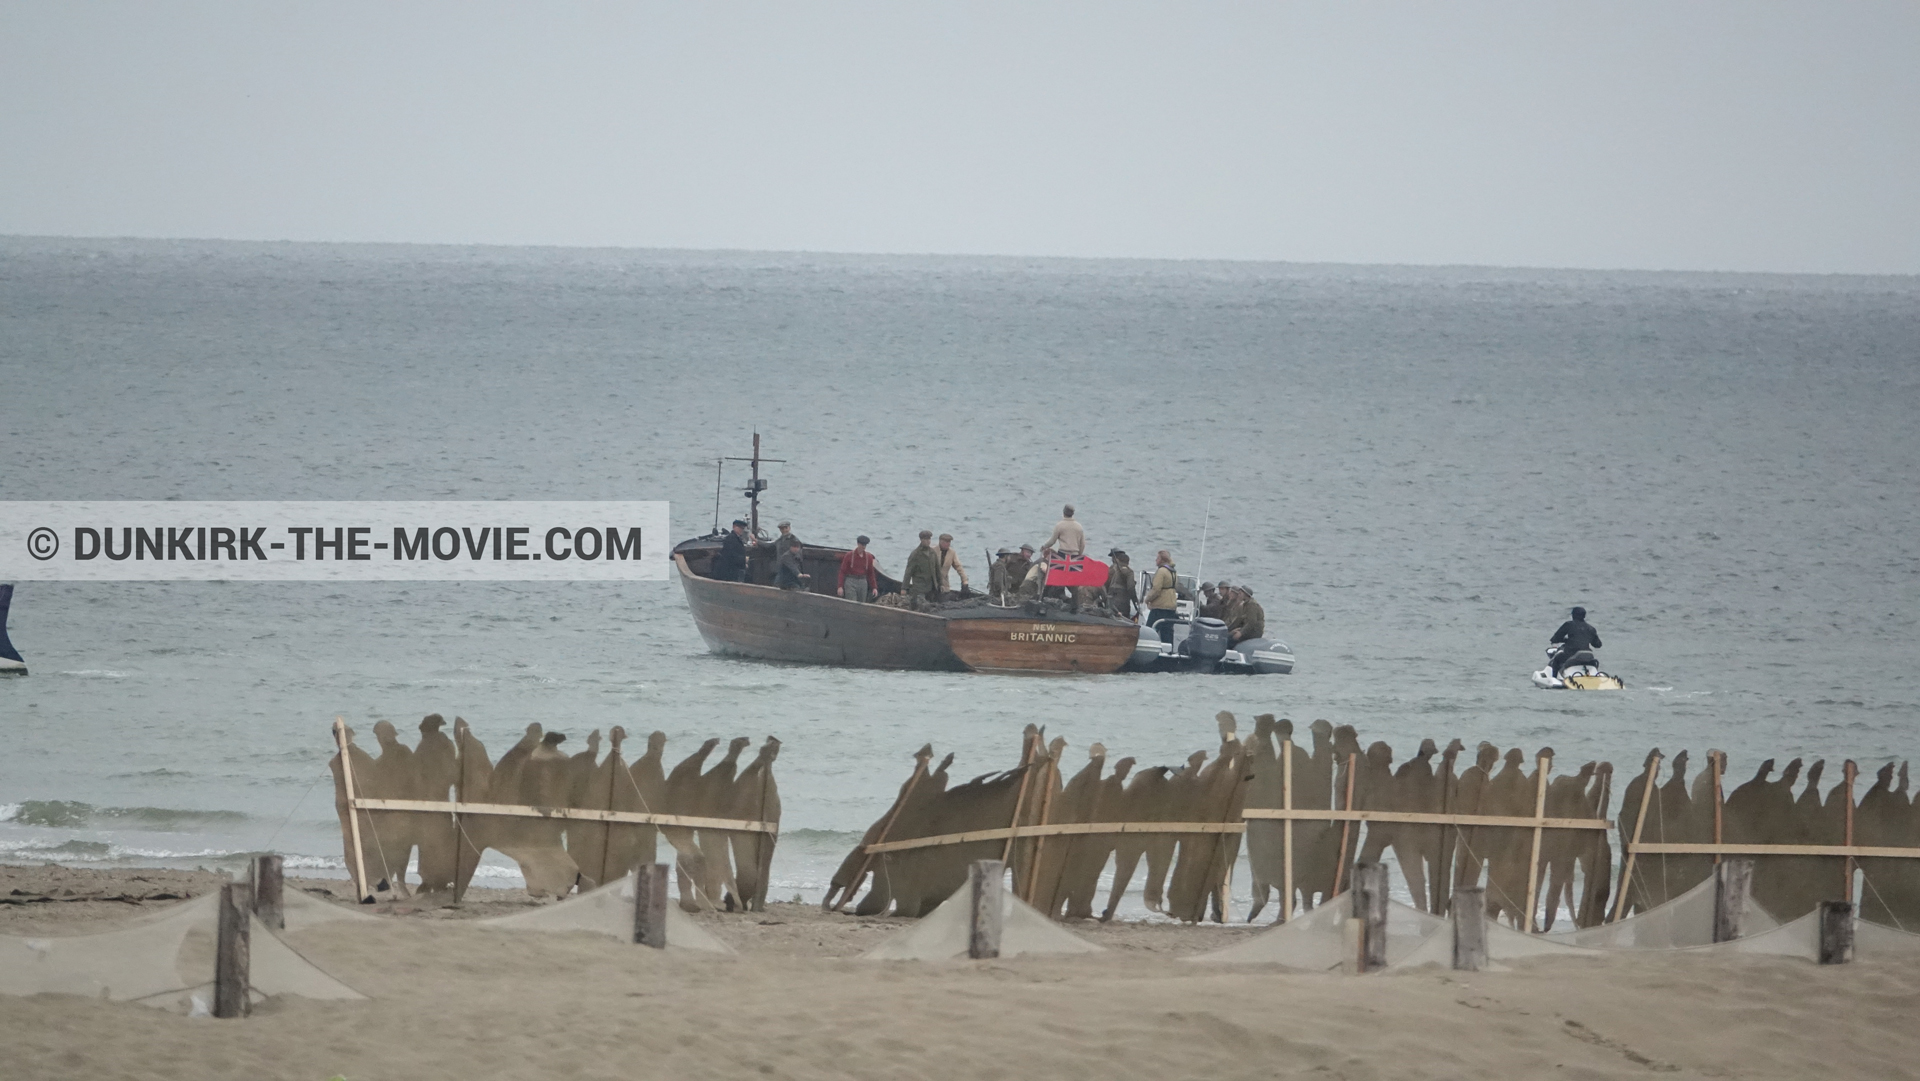 Picture with boat, decor, beach,  from behind the scene of the Dunkirk movie by Nolan